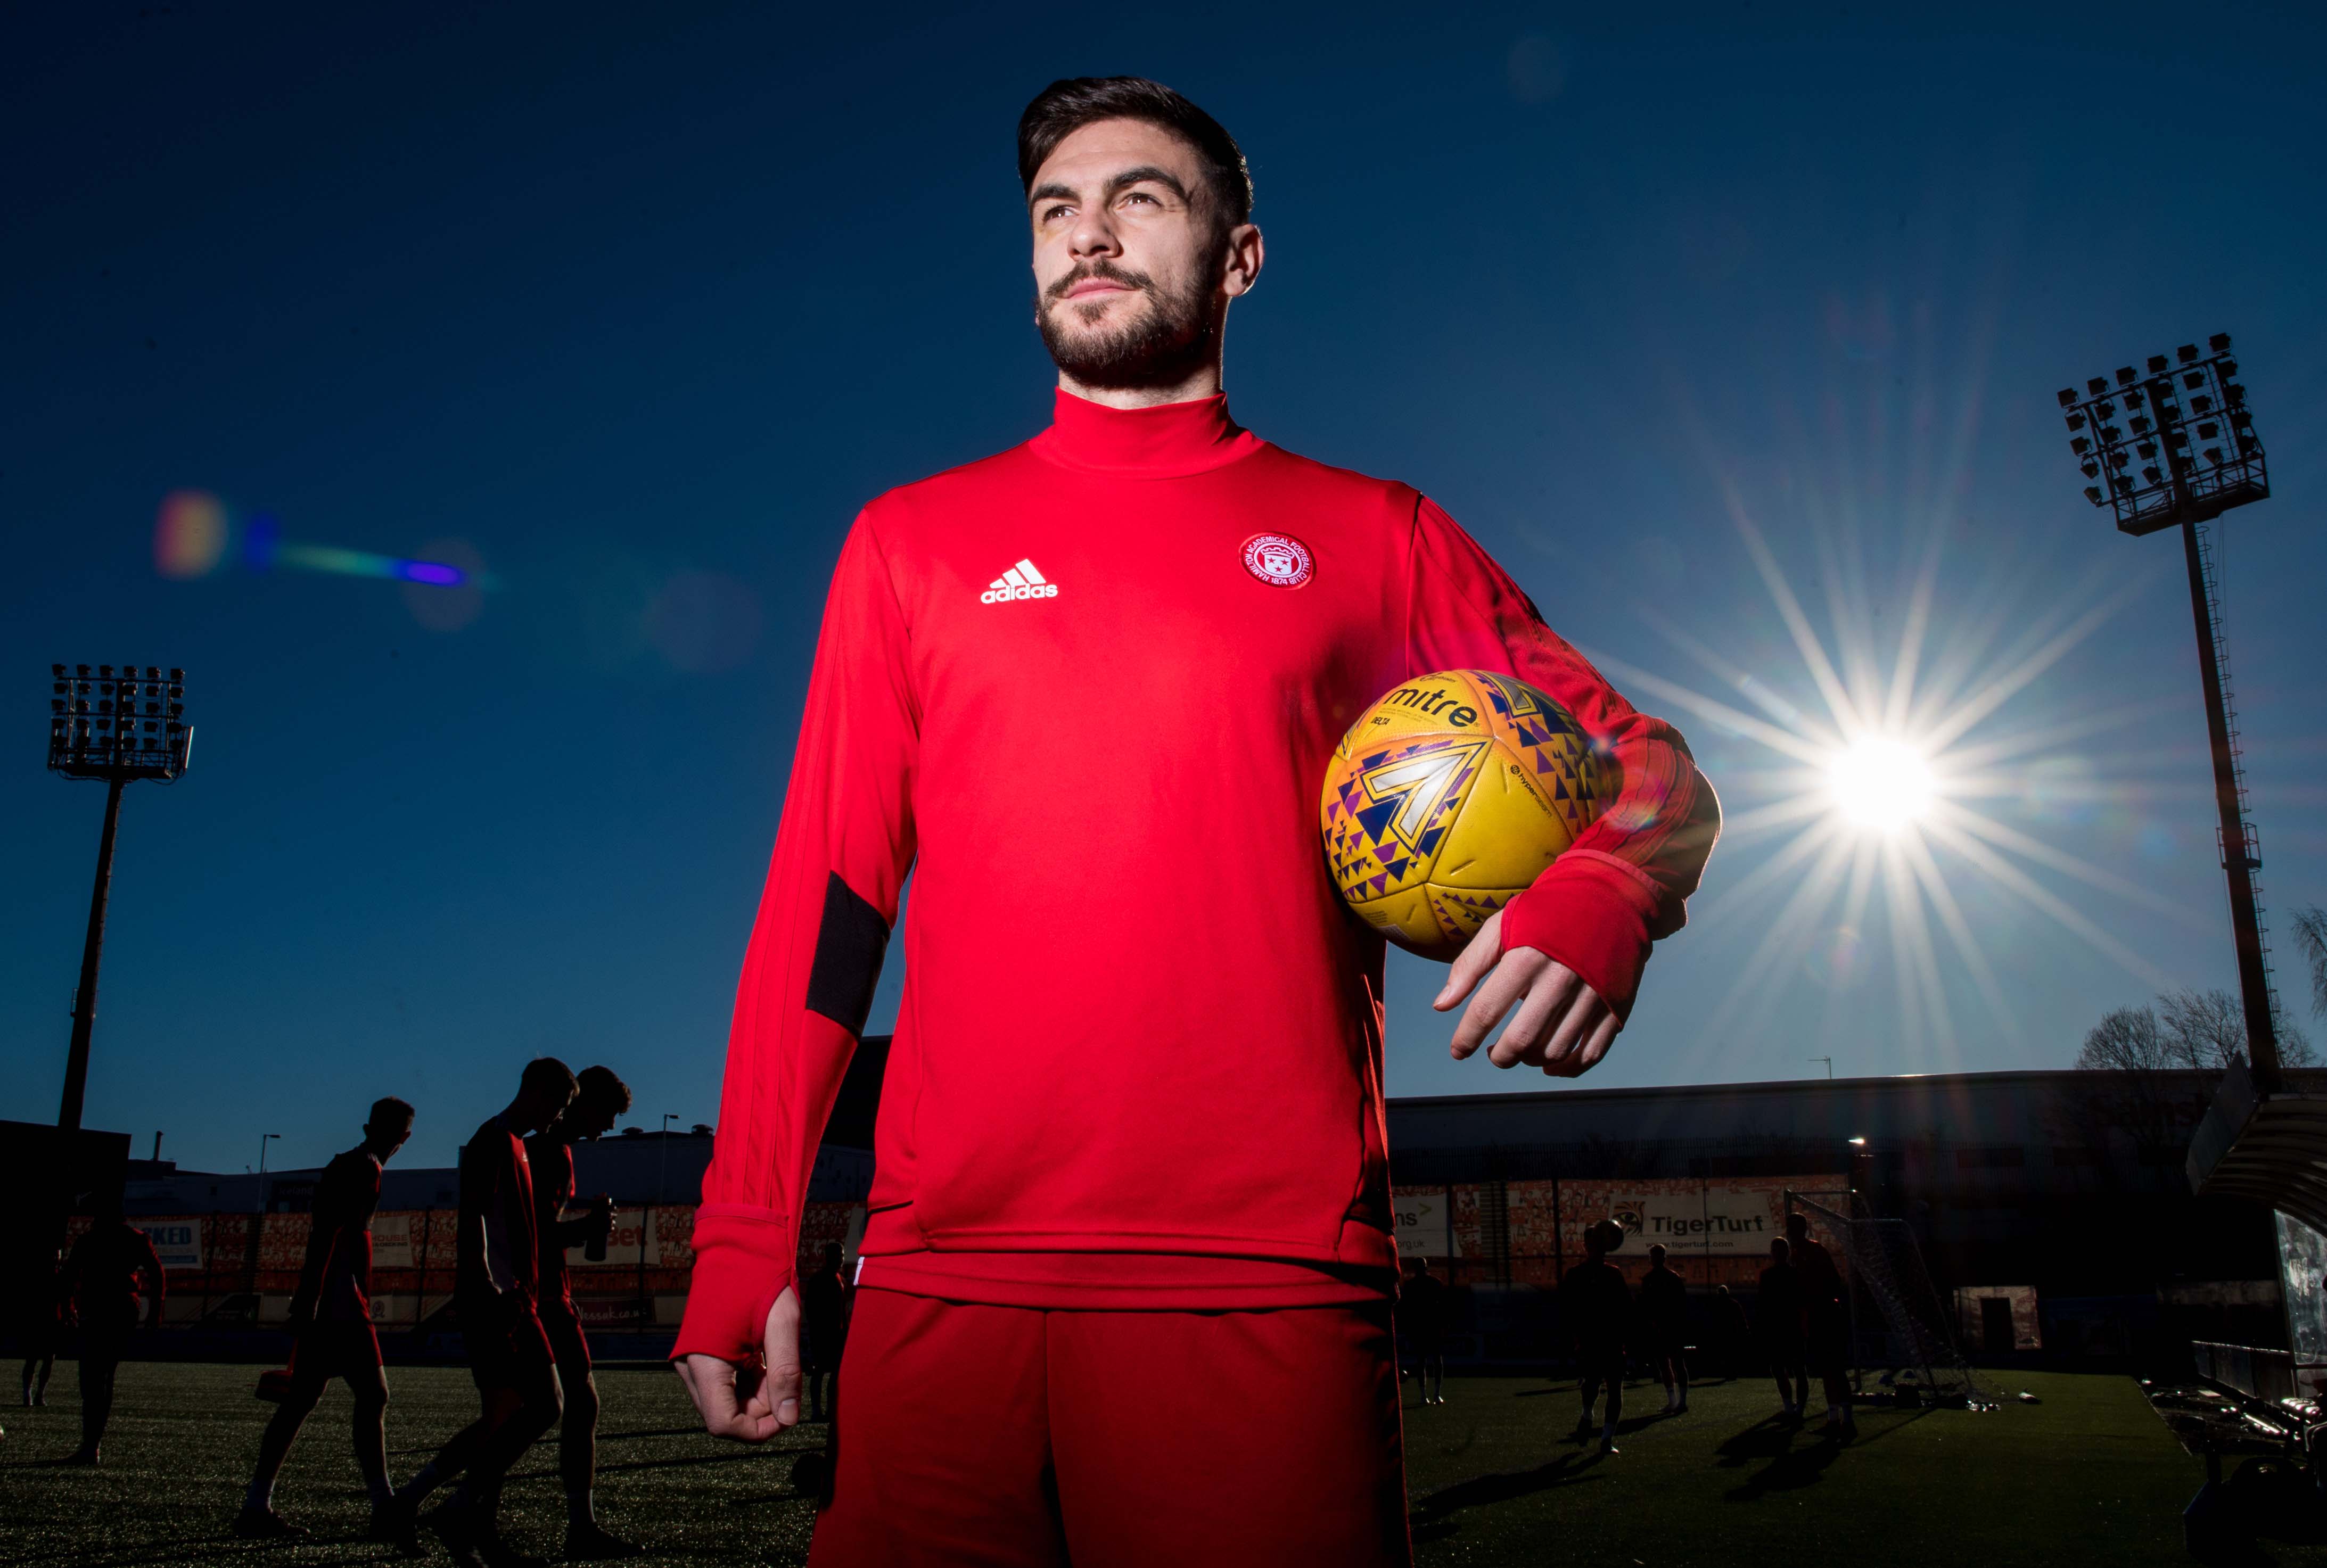 George Oakley made his debut for Hamilton Accies on Saturday.